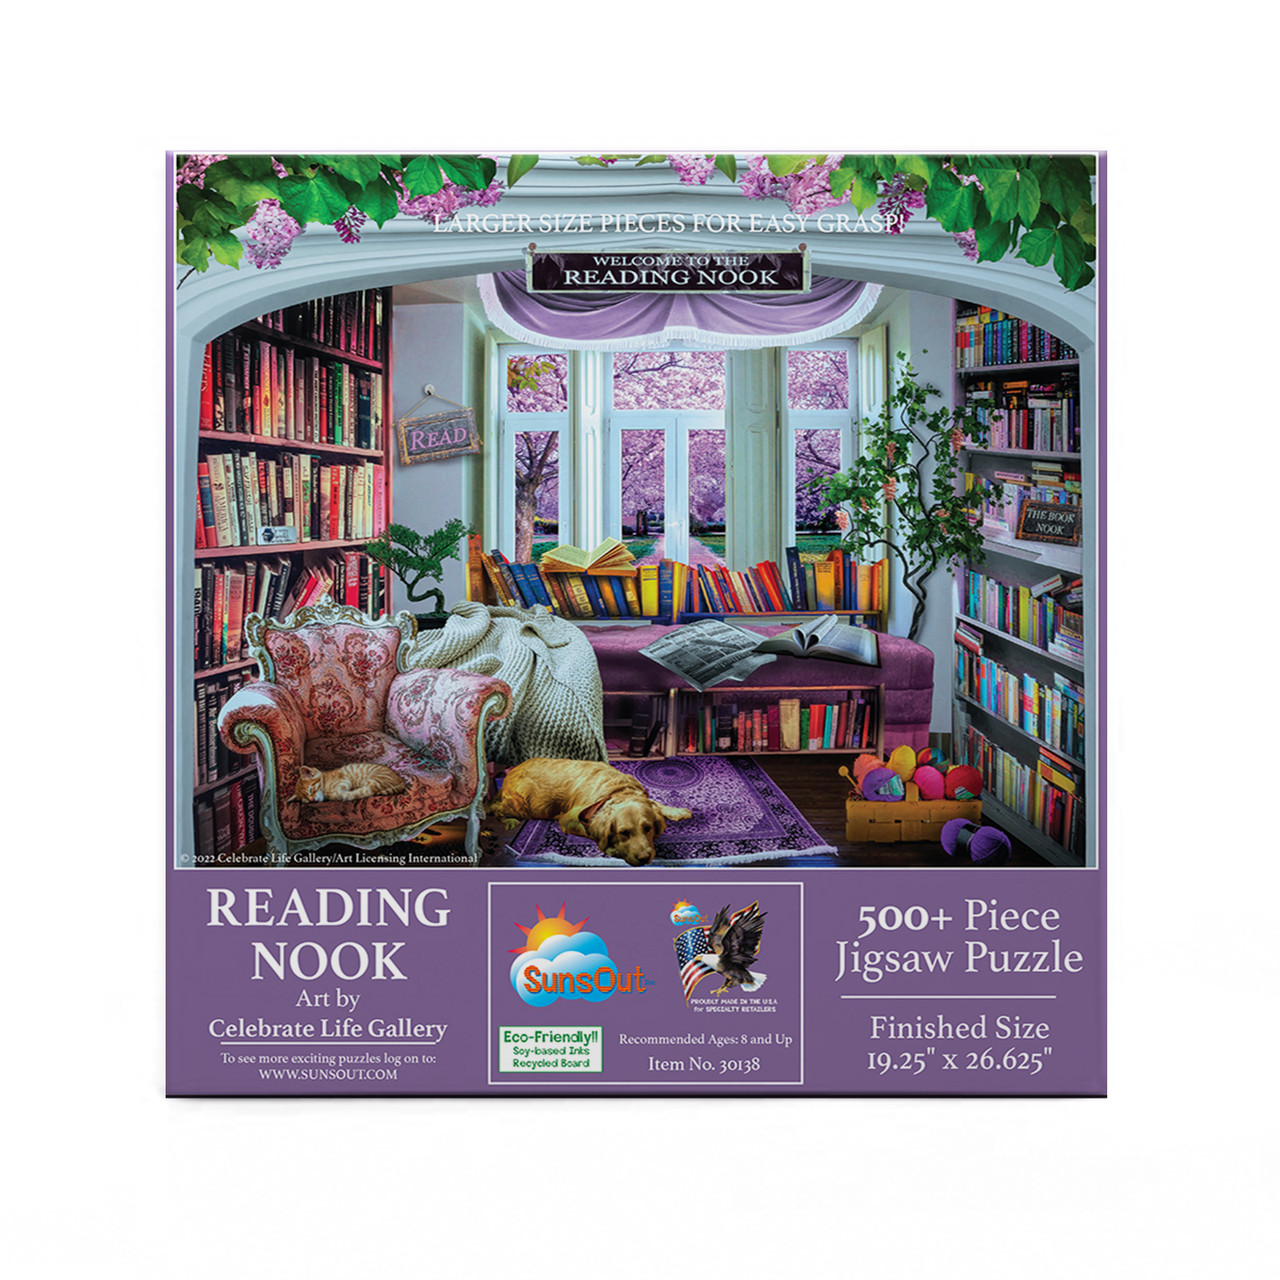 SUNSOUT INC - Reading Nook - 500 pc Large Pieces Jigsaw Puzzle by Artist:  Celebrate Life Gallery - Finished Size 19.25 x 26.625 - MPN# 30138